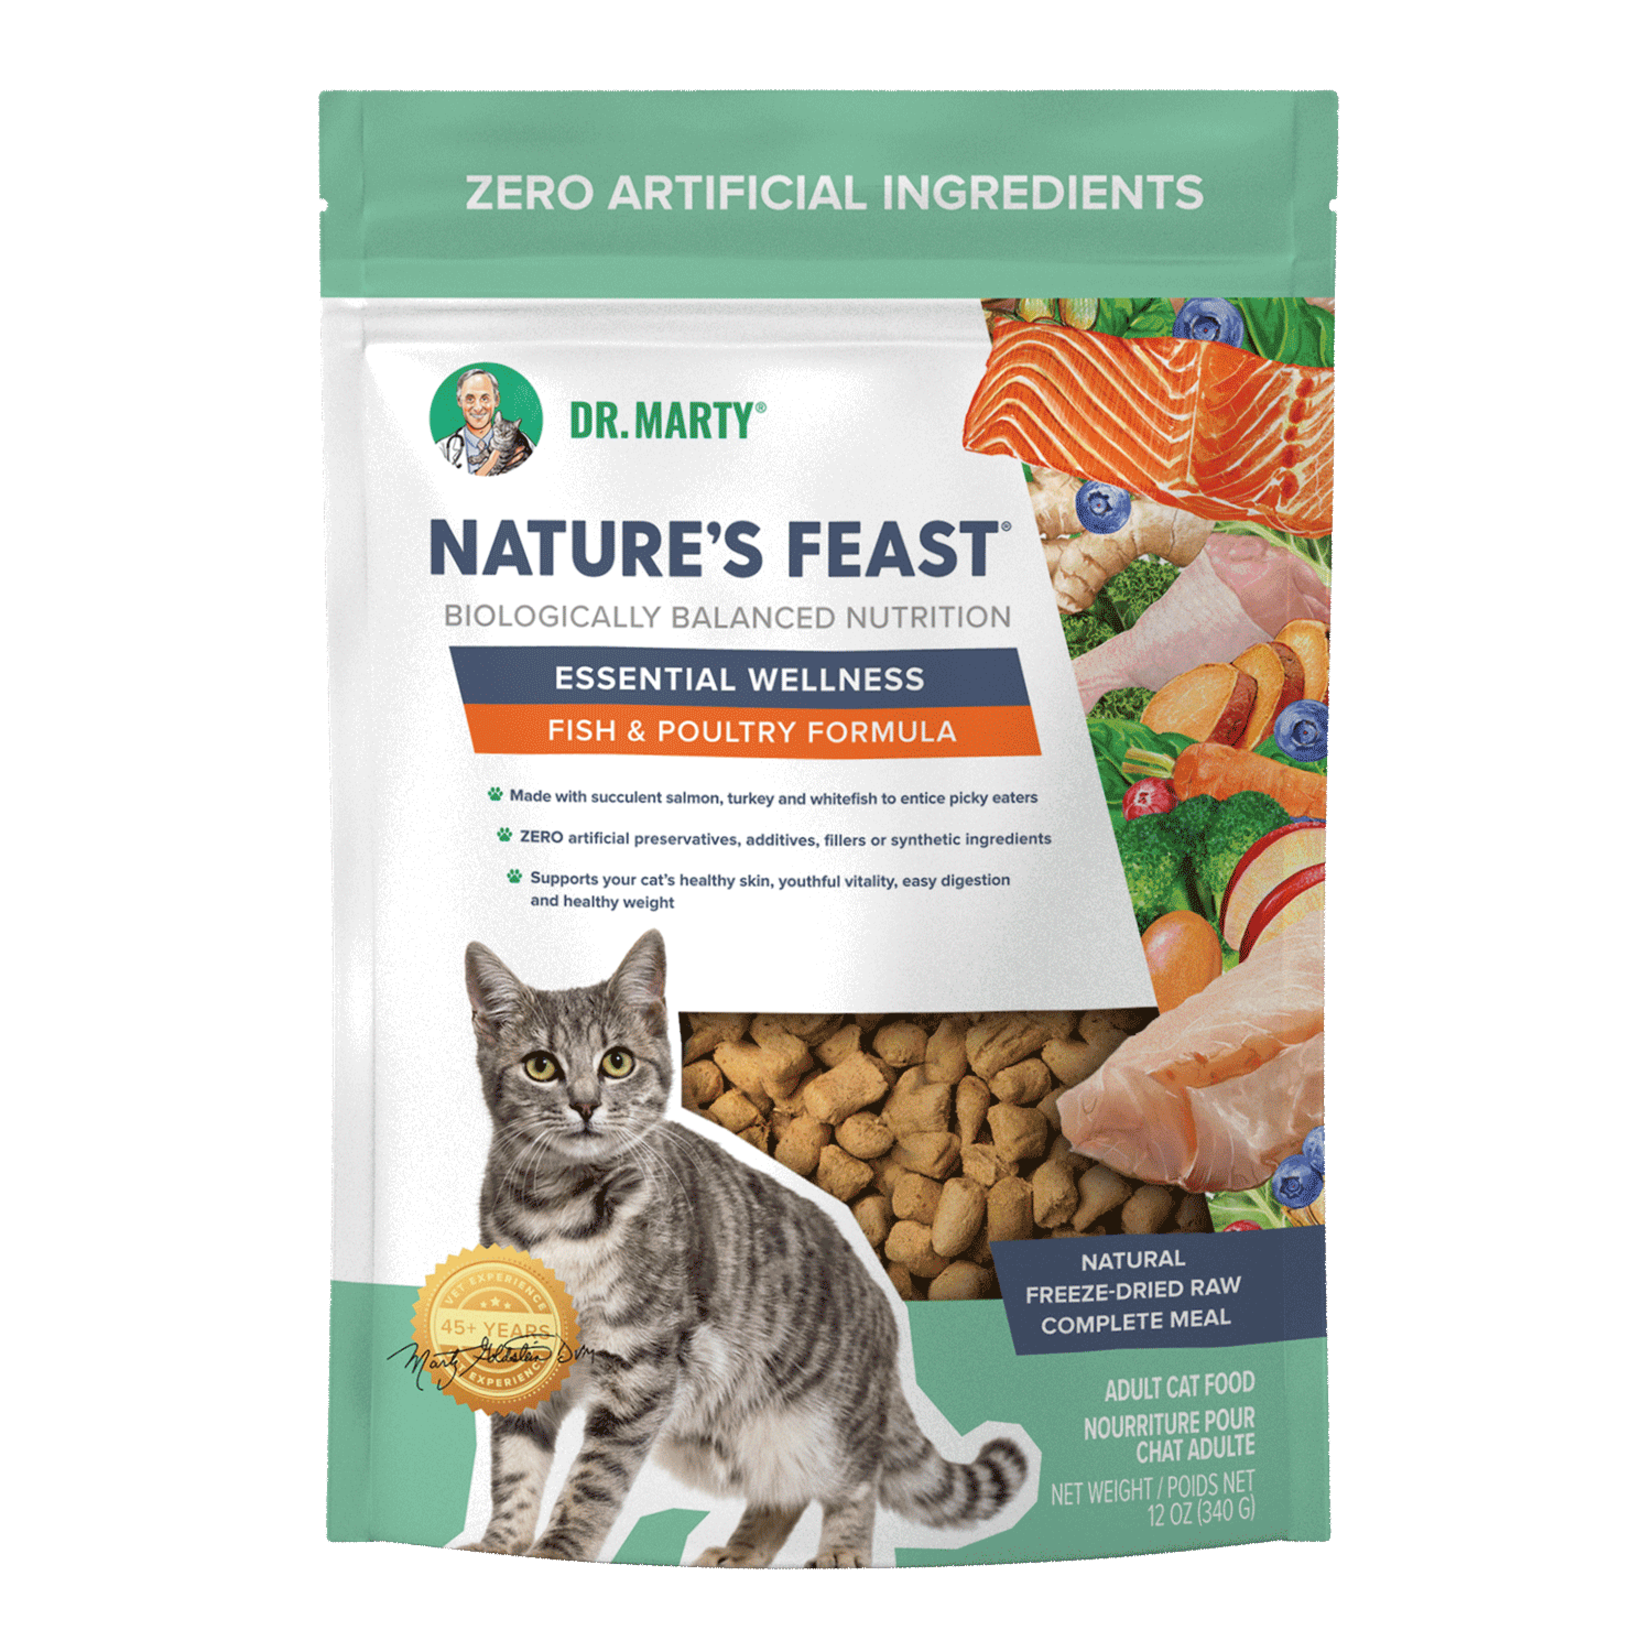 Dr. Marty Dr. Marty Nature's Blend - Freeze-Dried Raw Essential Wellness Fish & Poultry Cat Food